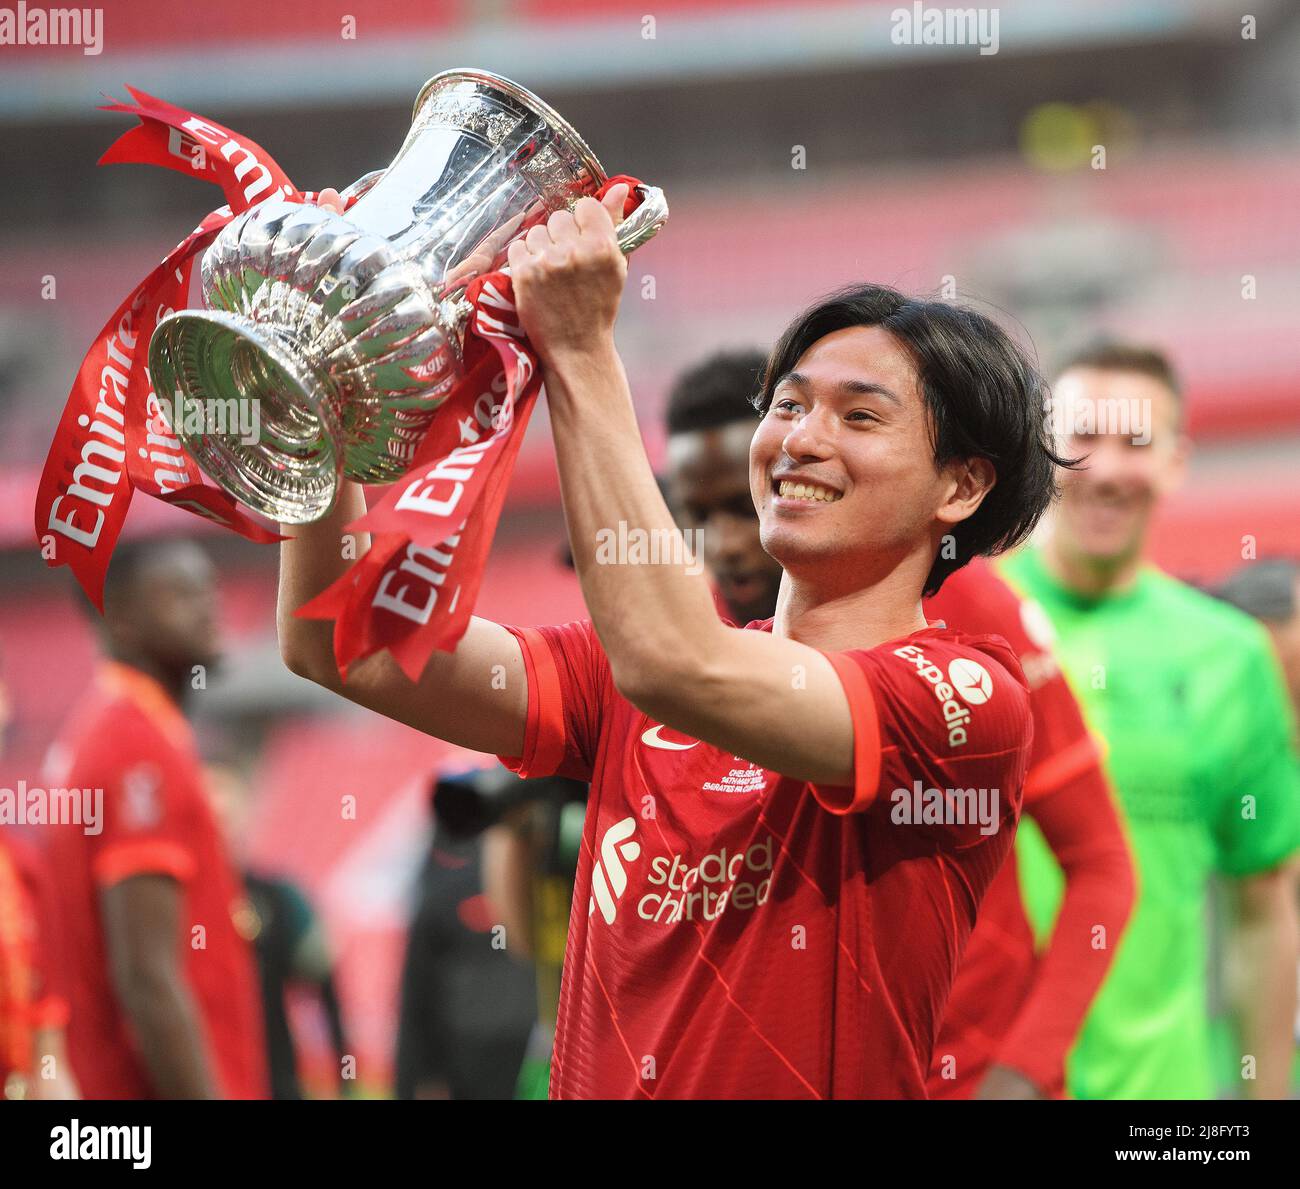 14 May 2022 - Chelsea v Liverpool - Emirates FA Cup Final - Wembley Stadium  Takumi Minamino celebrates with the FA Cup  Picture Credit : © Mark Pain / Alamy Live News Stock Photo